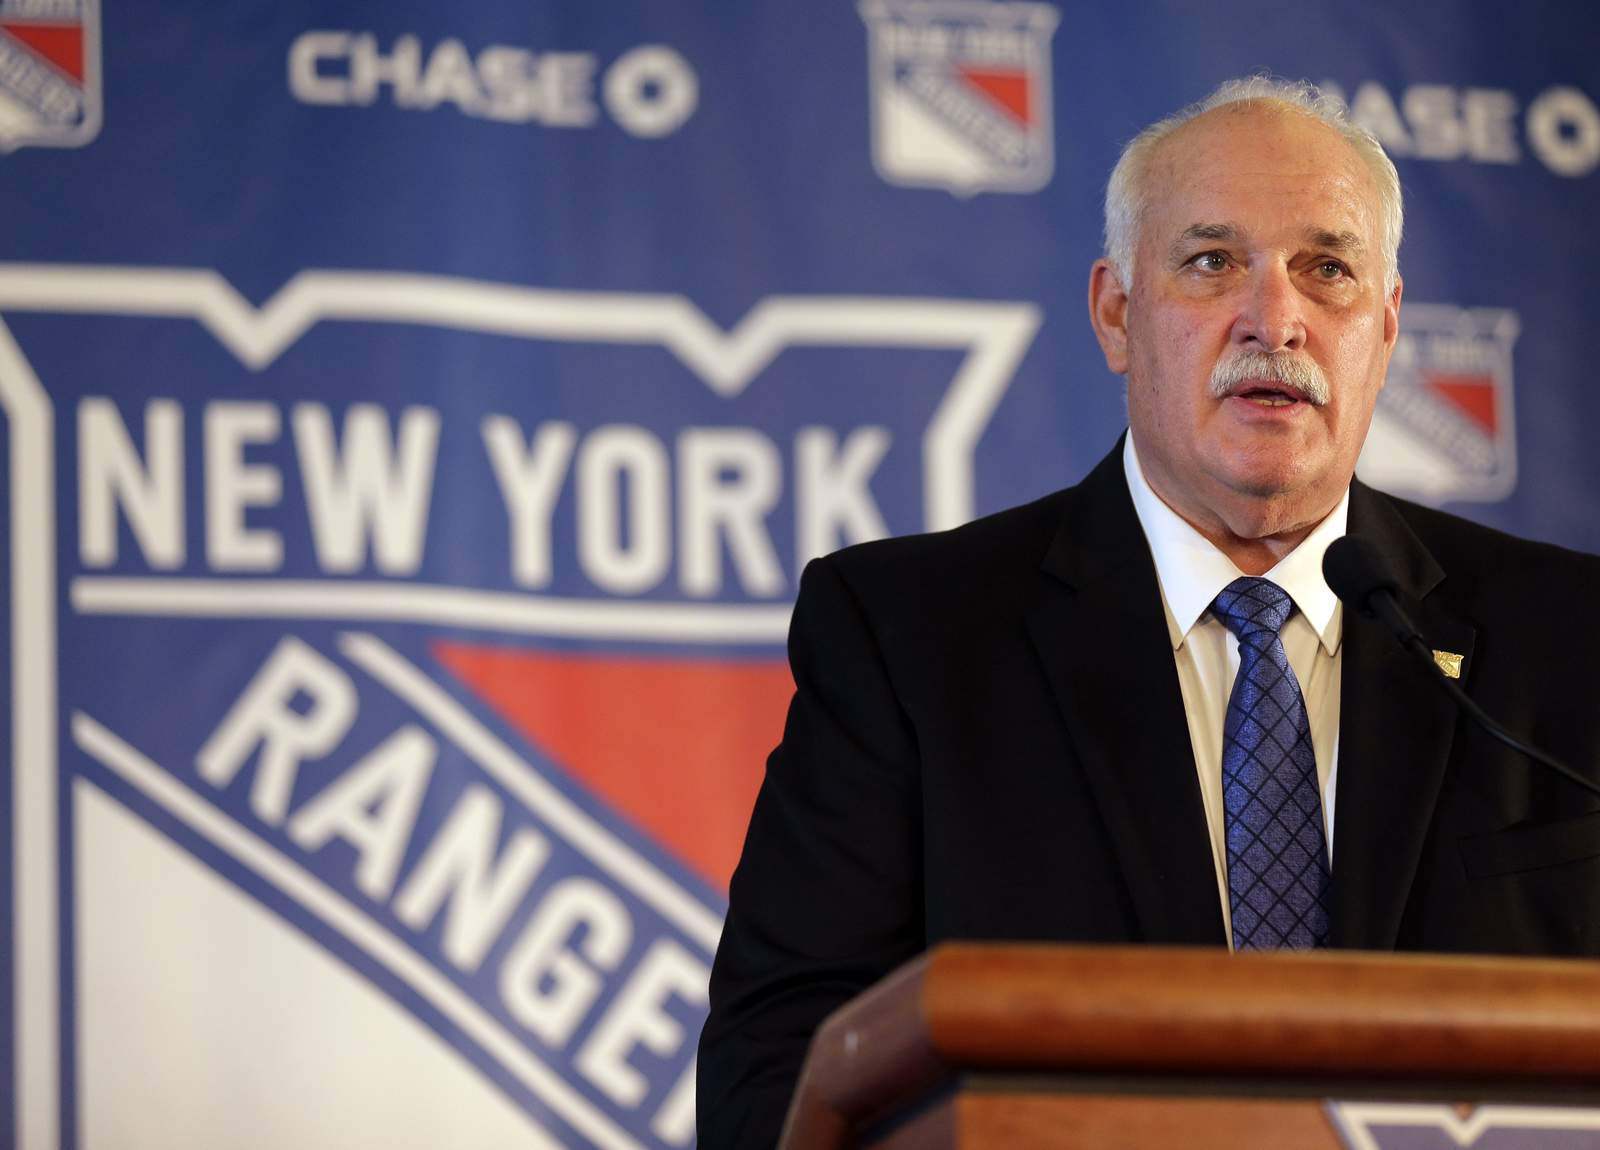 Rangers have work to do despite having top pick in NHL draft